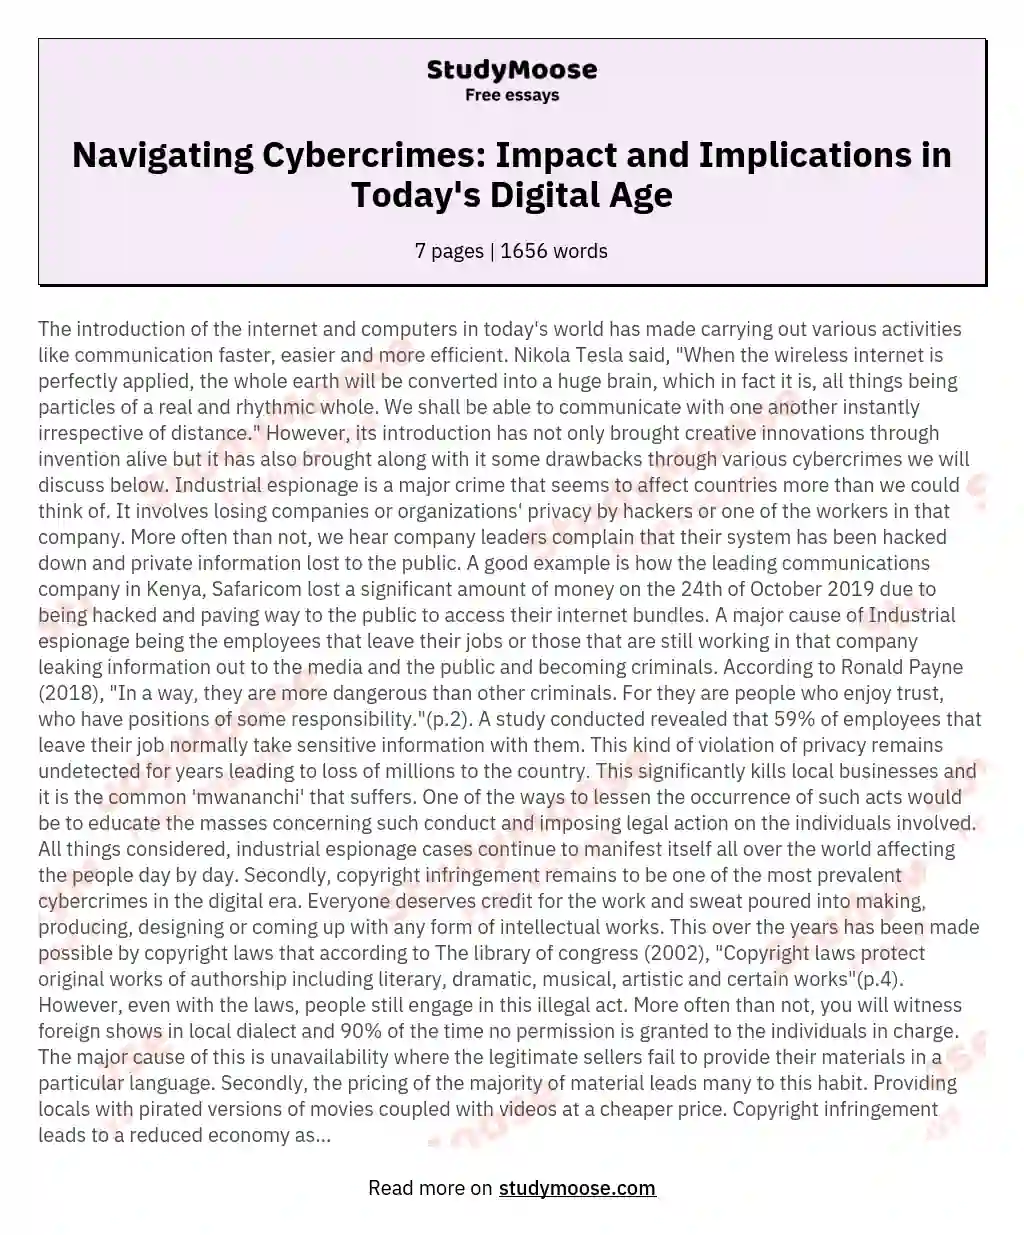 Navigating Cybercrimes: Impact and Implications in Today's Digital Age essay